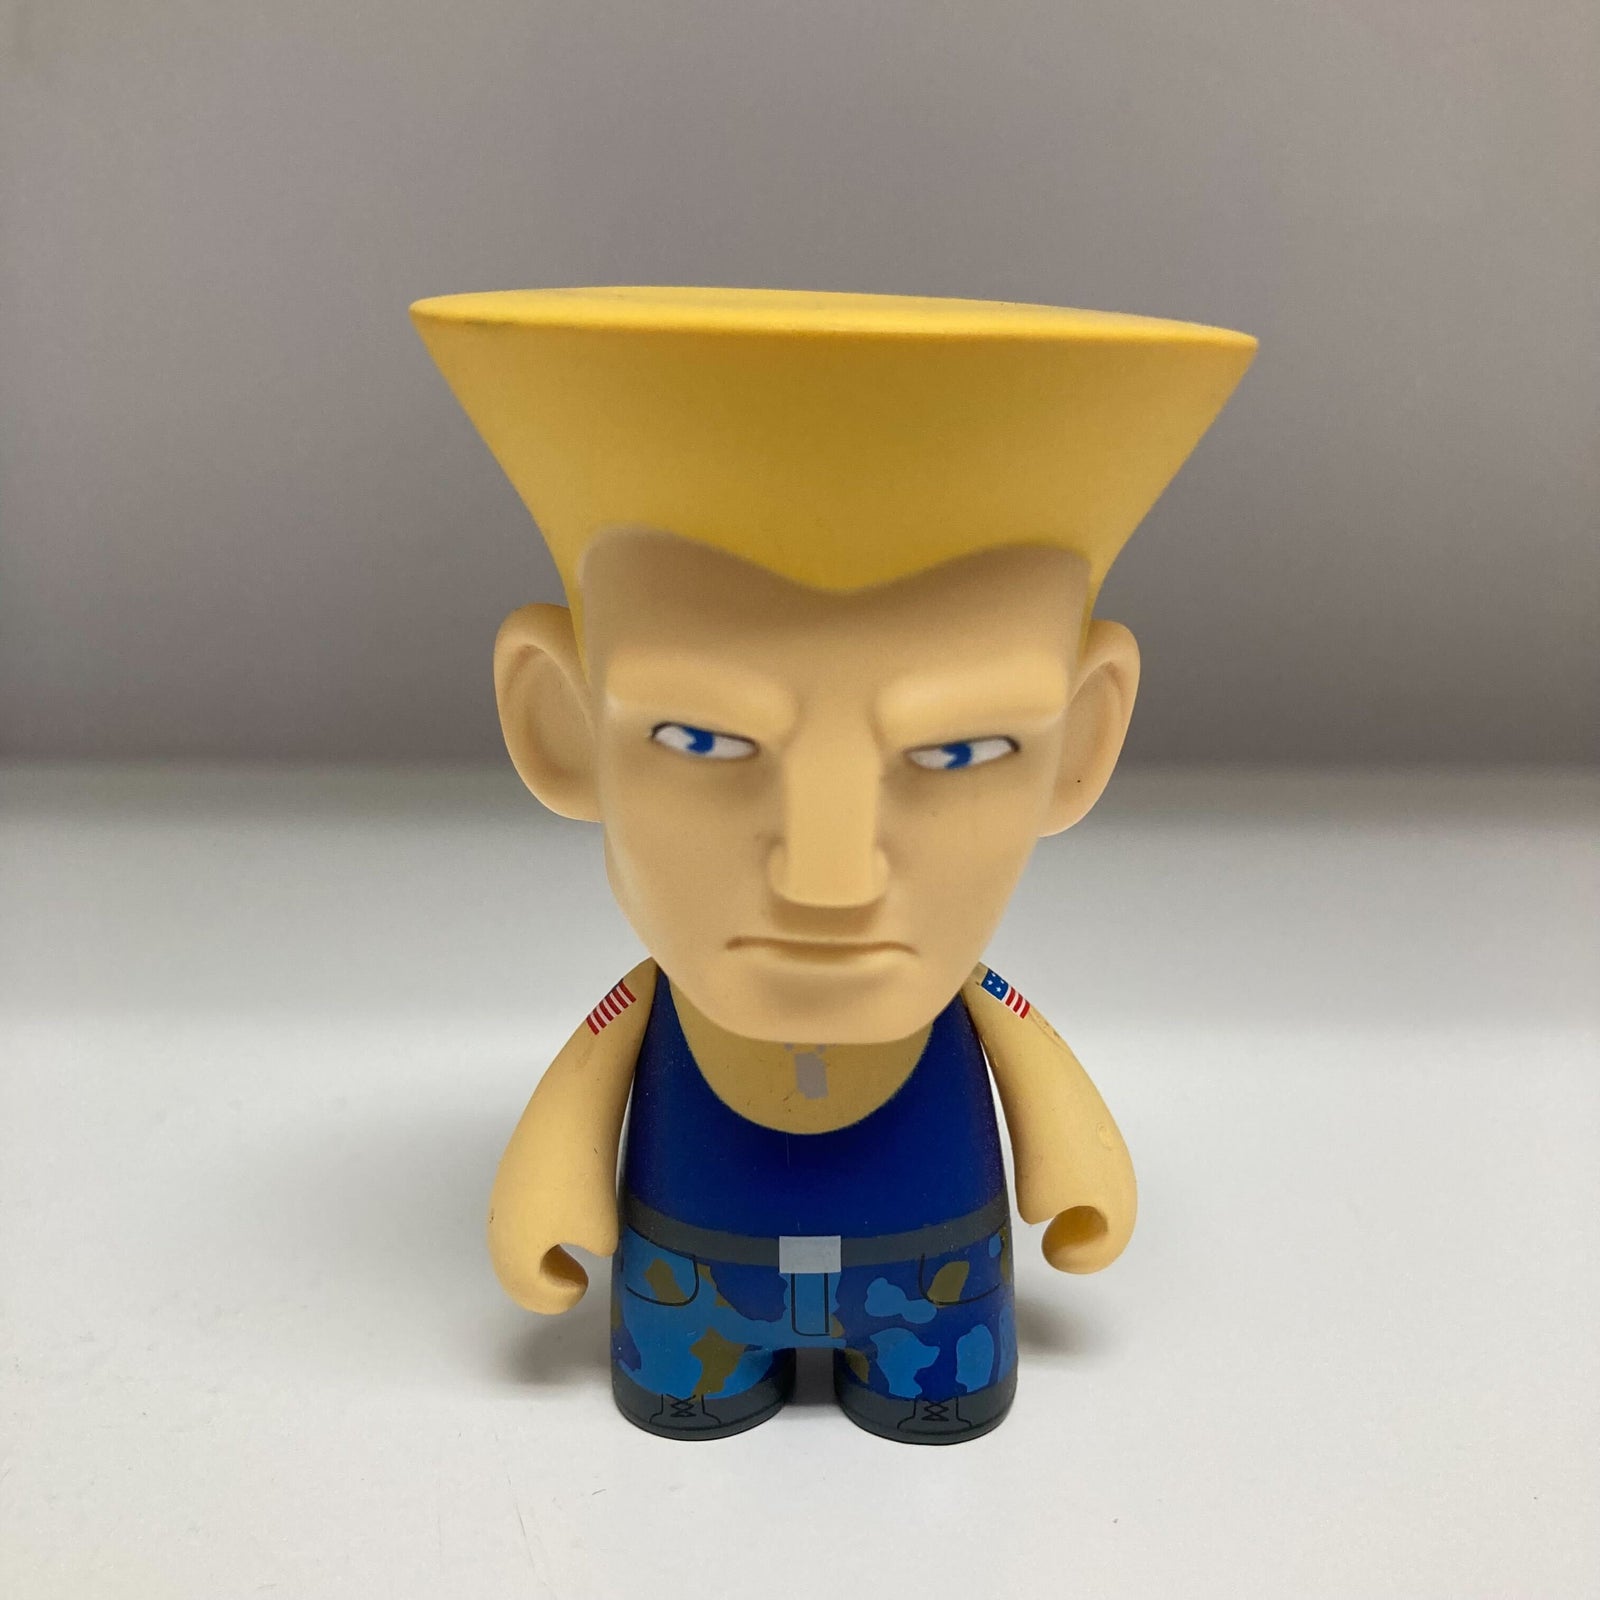 Guile - Street Fighter Series 1 by Kidrobot